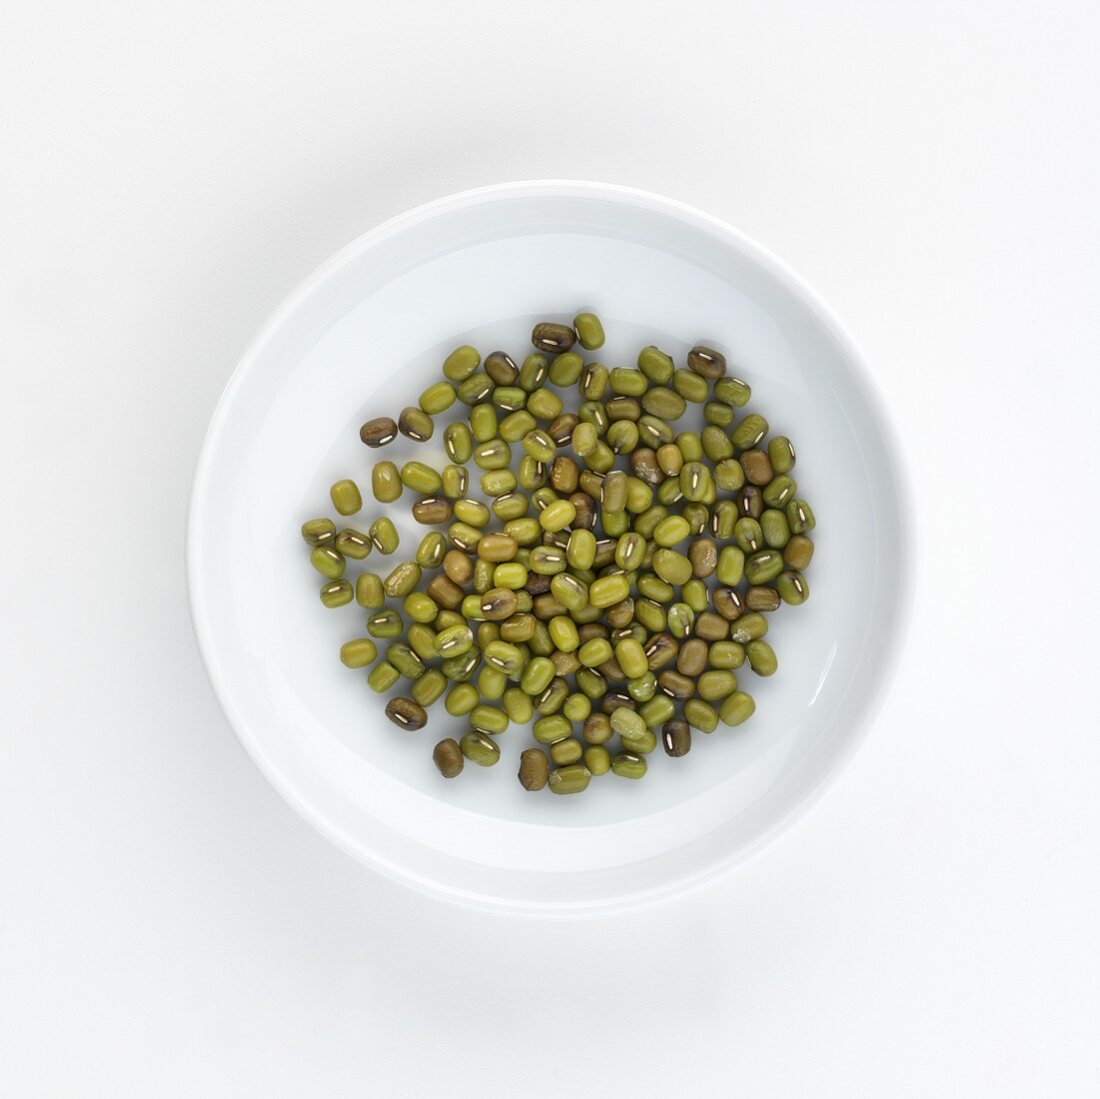 A plate of green mungo beans, seen from above